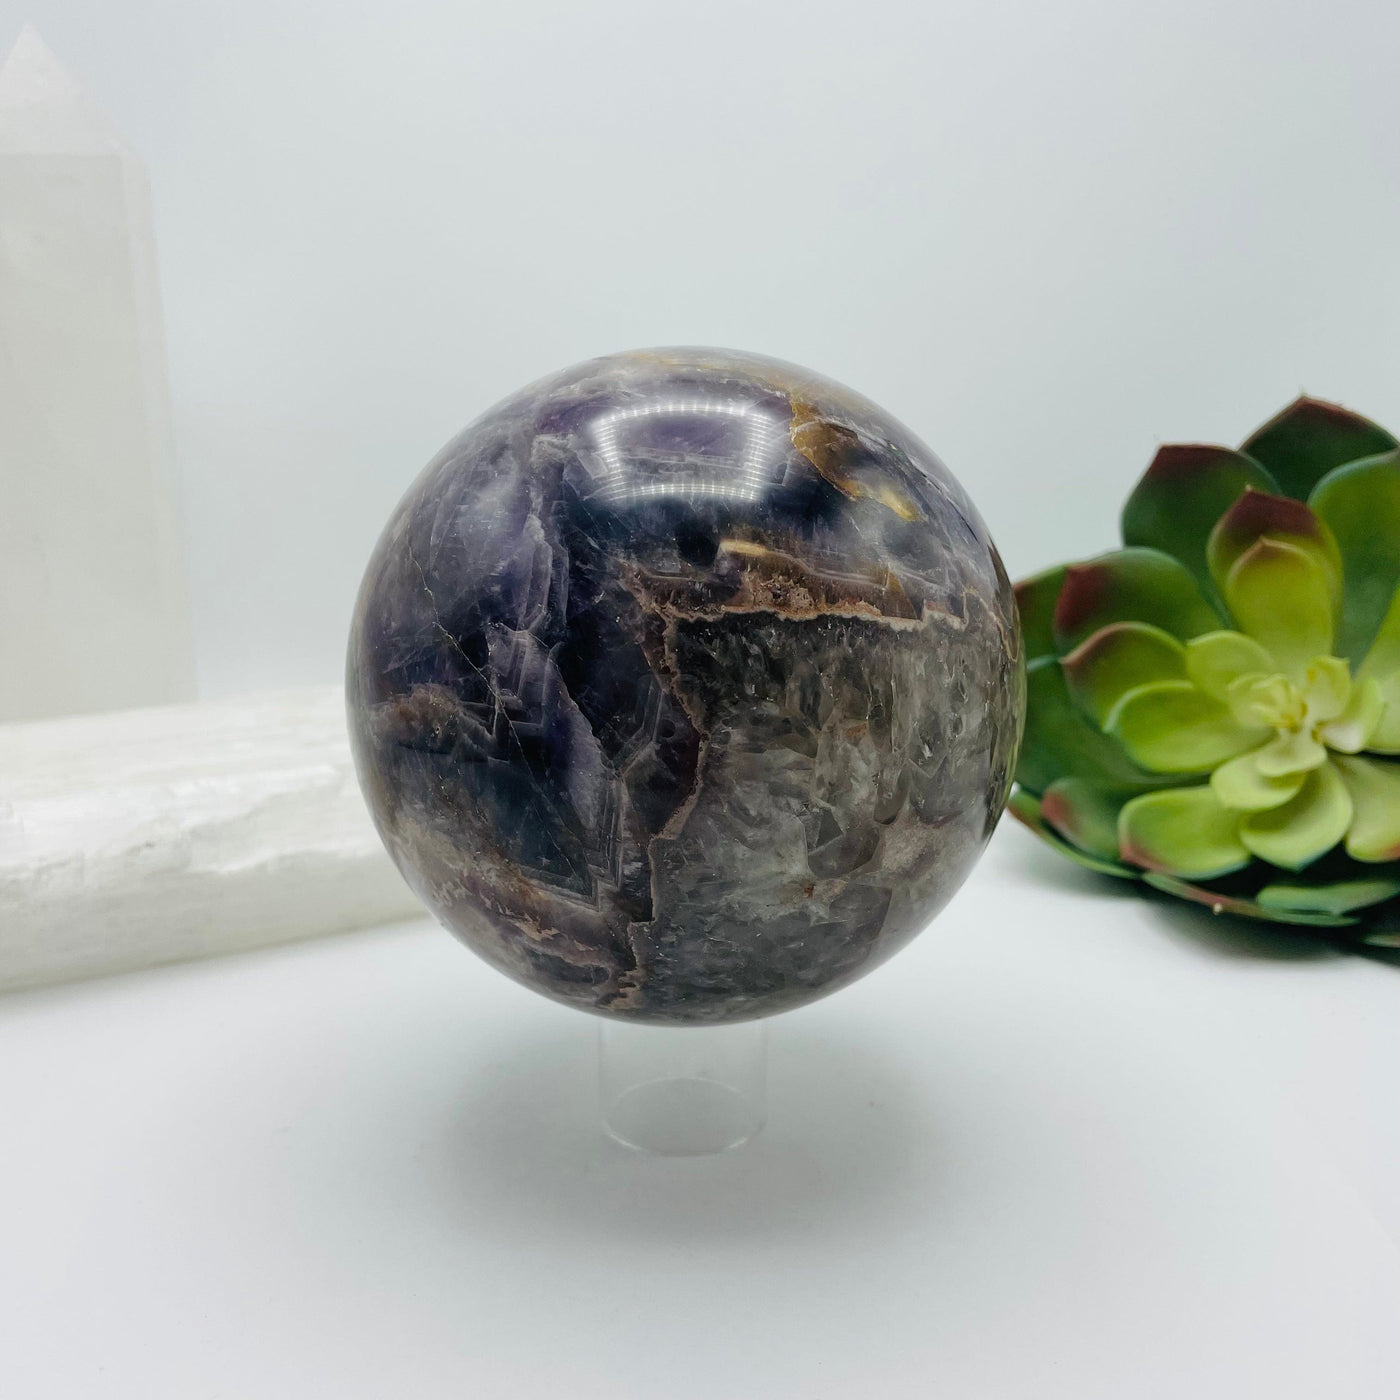 Chevron amethyst sphere with decorations in the background